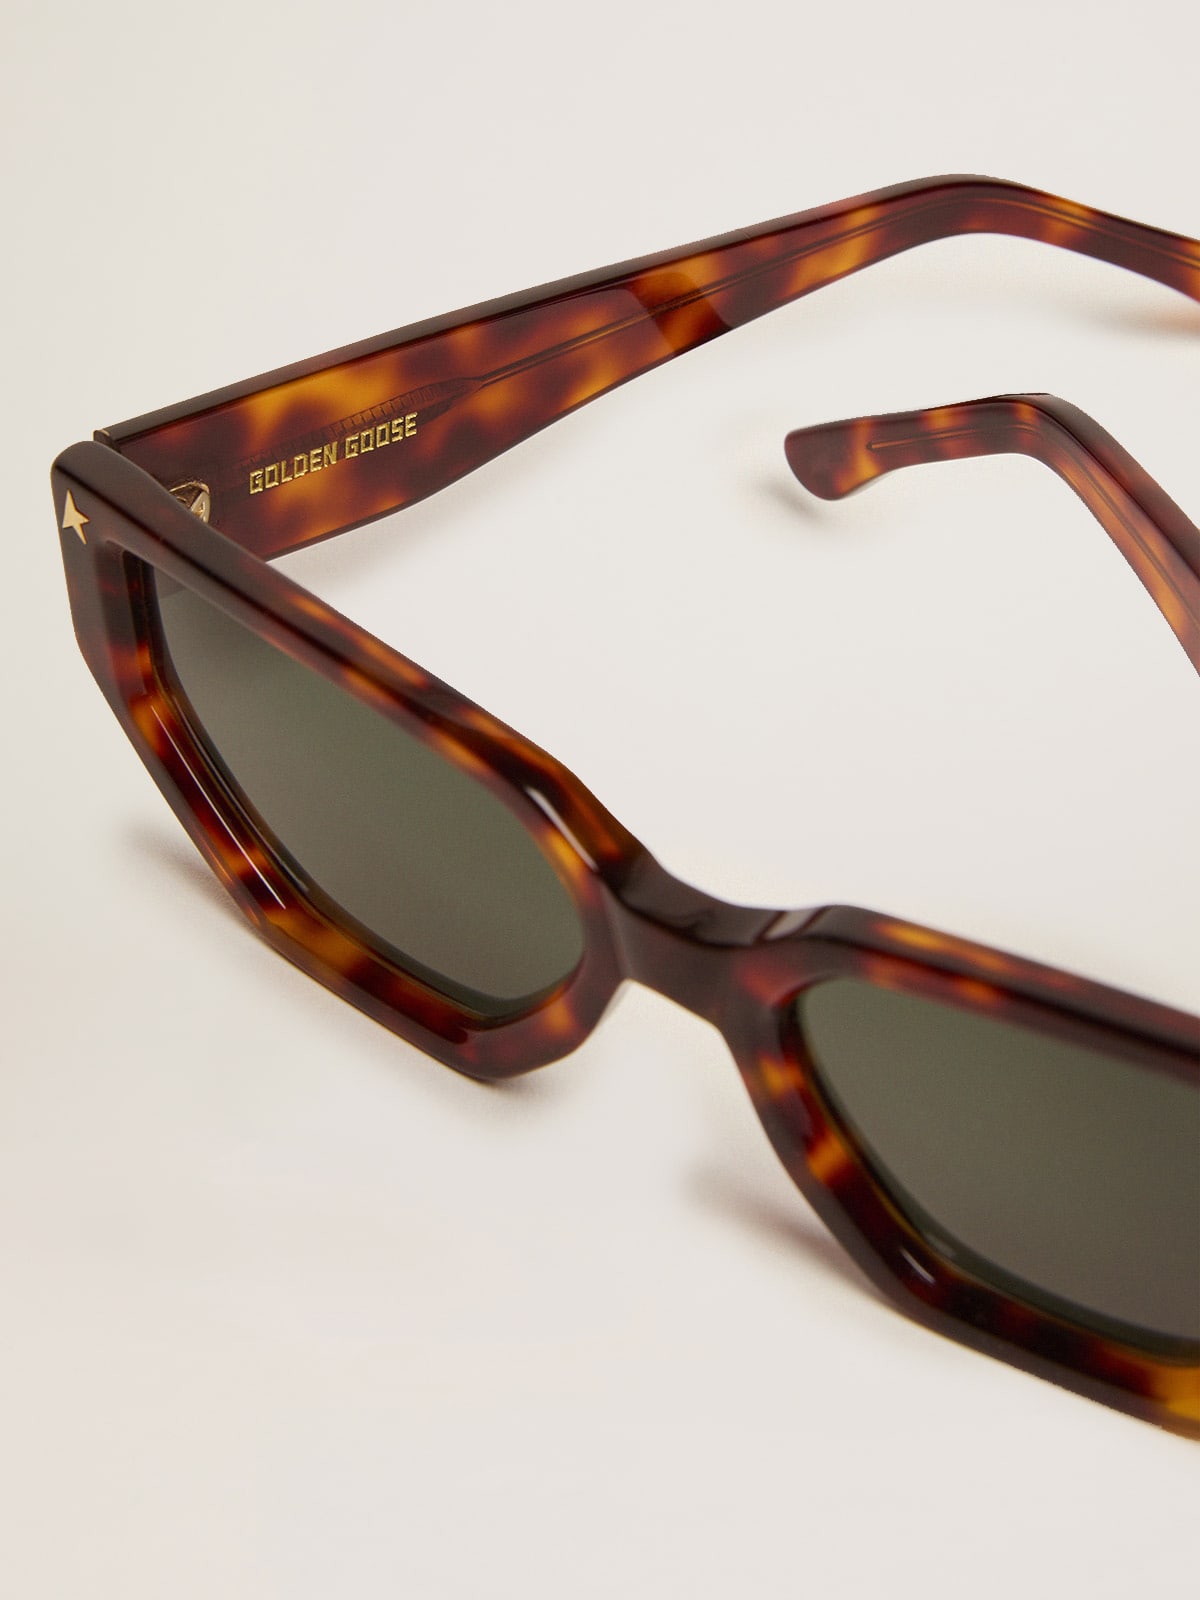 Golden Goose - Rectangular-style Sunframe Jackie with Havana brown frame and gold details in 